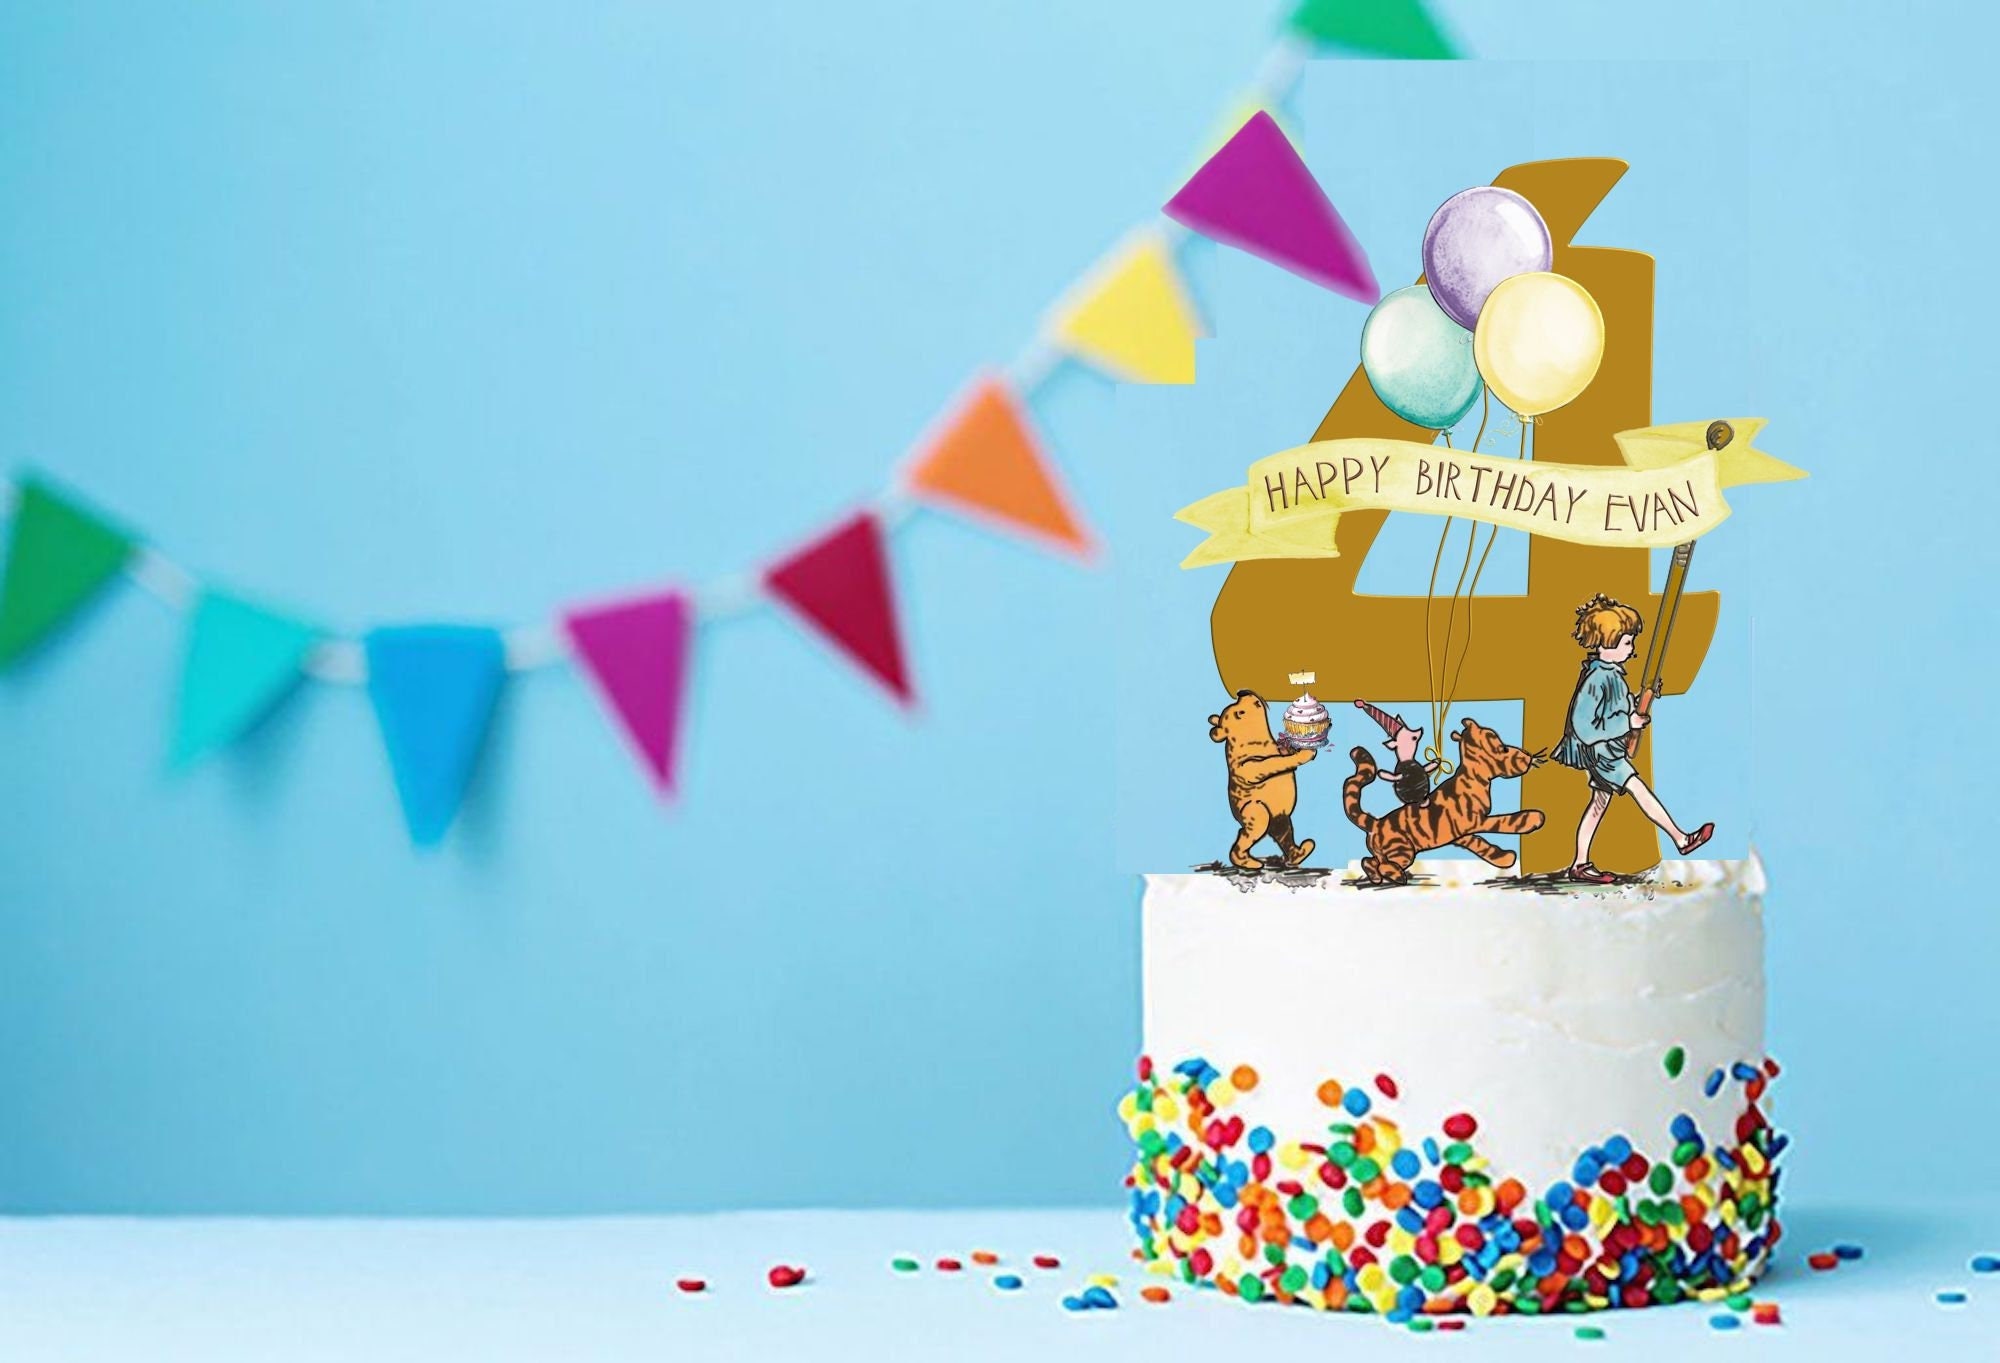 Classic Winnie the Pooh Cake Toppers Winnie the Pooh Birthday 